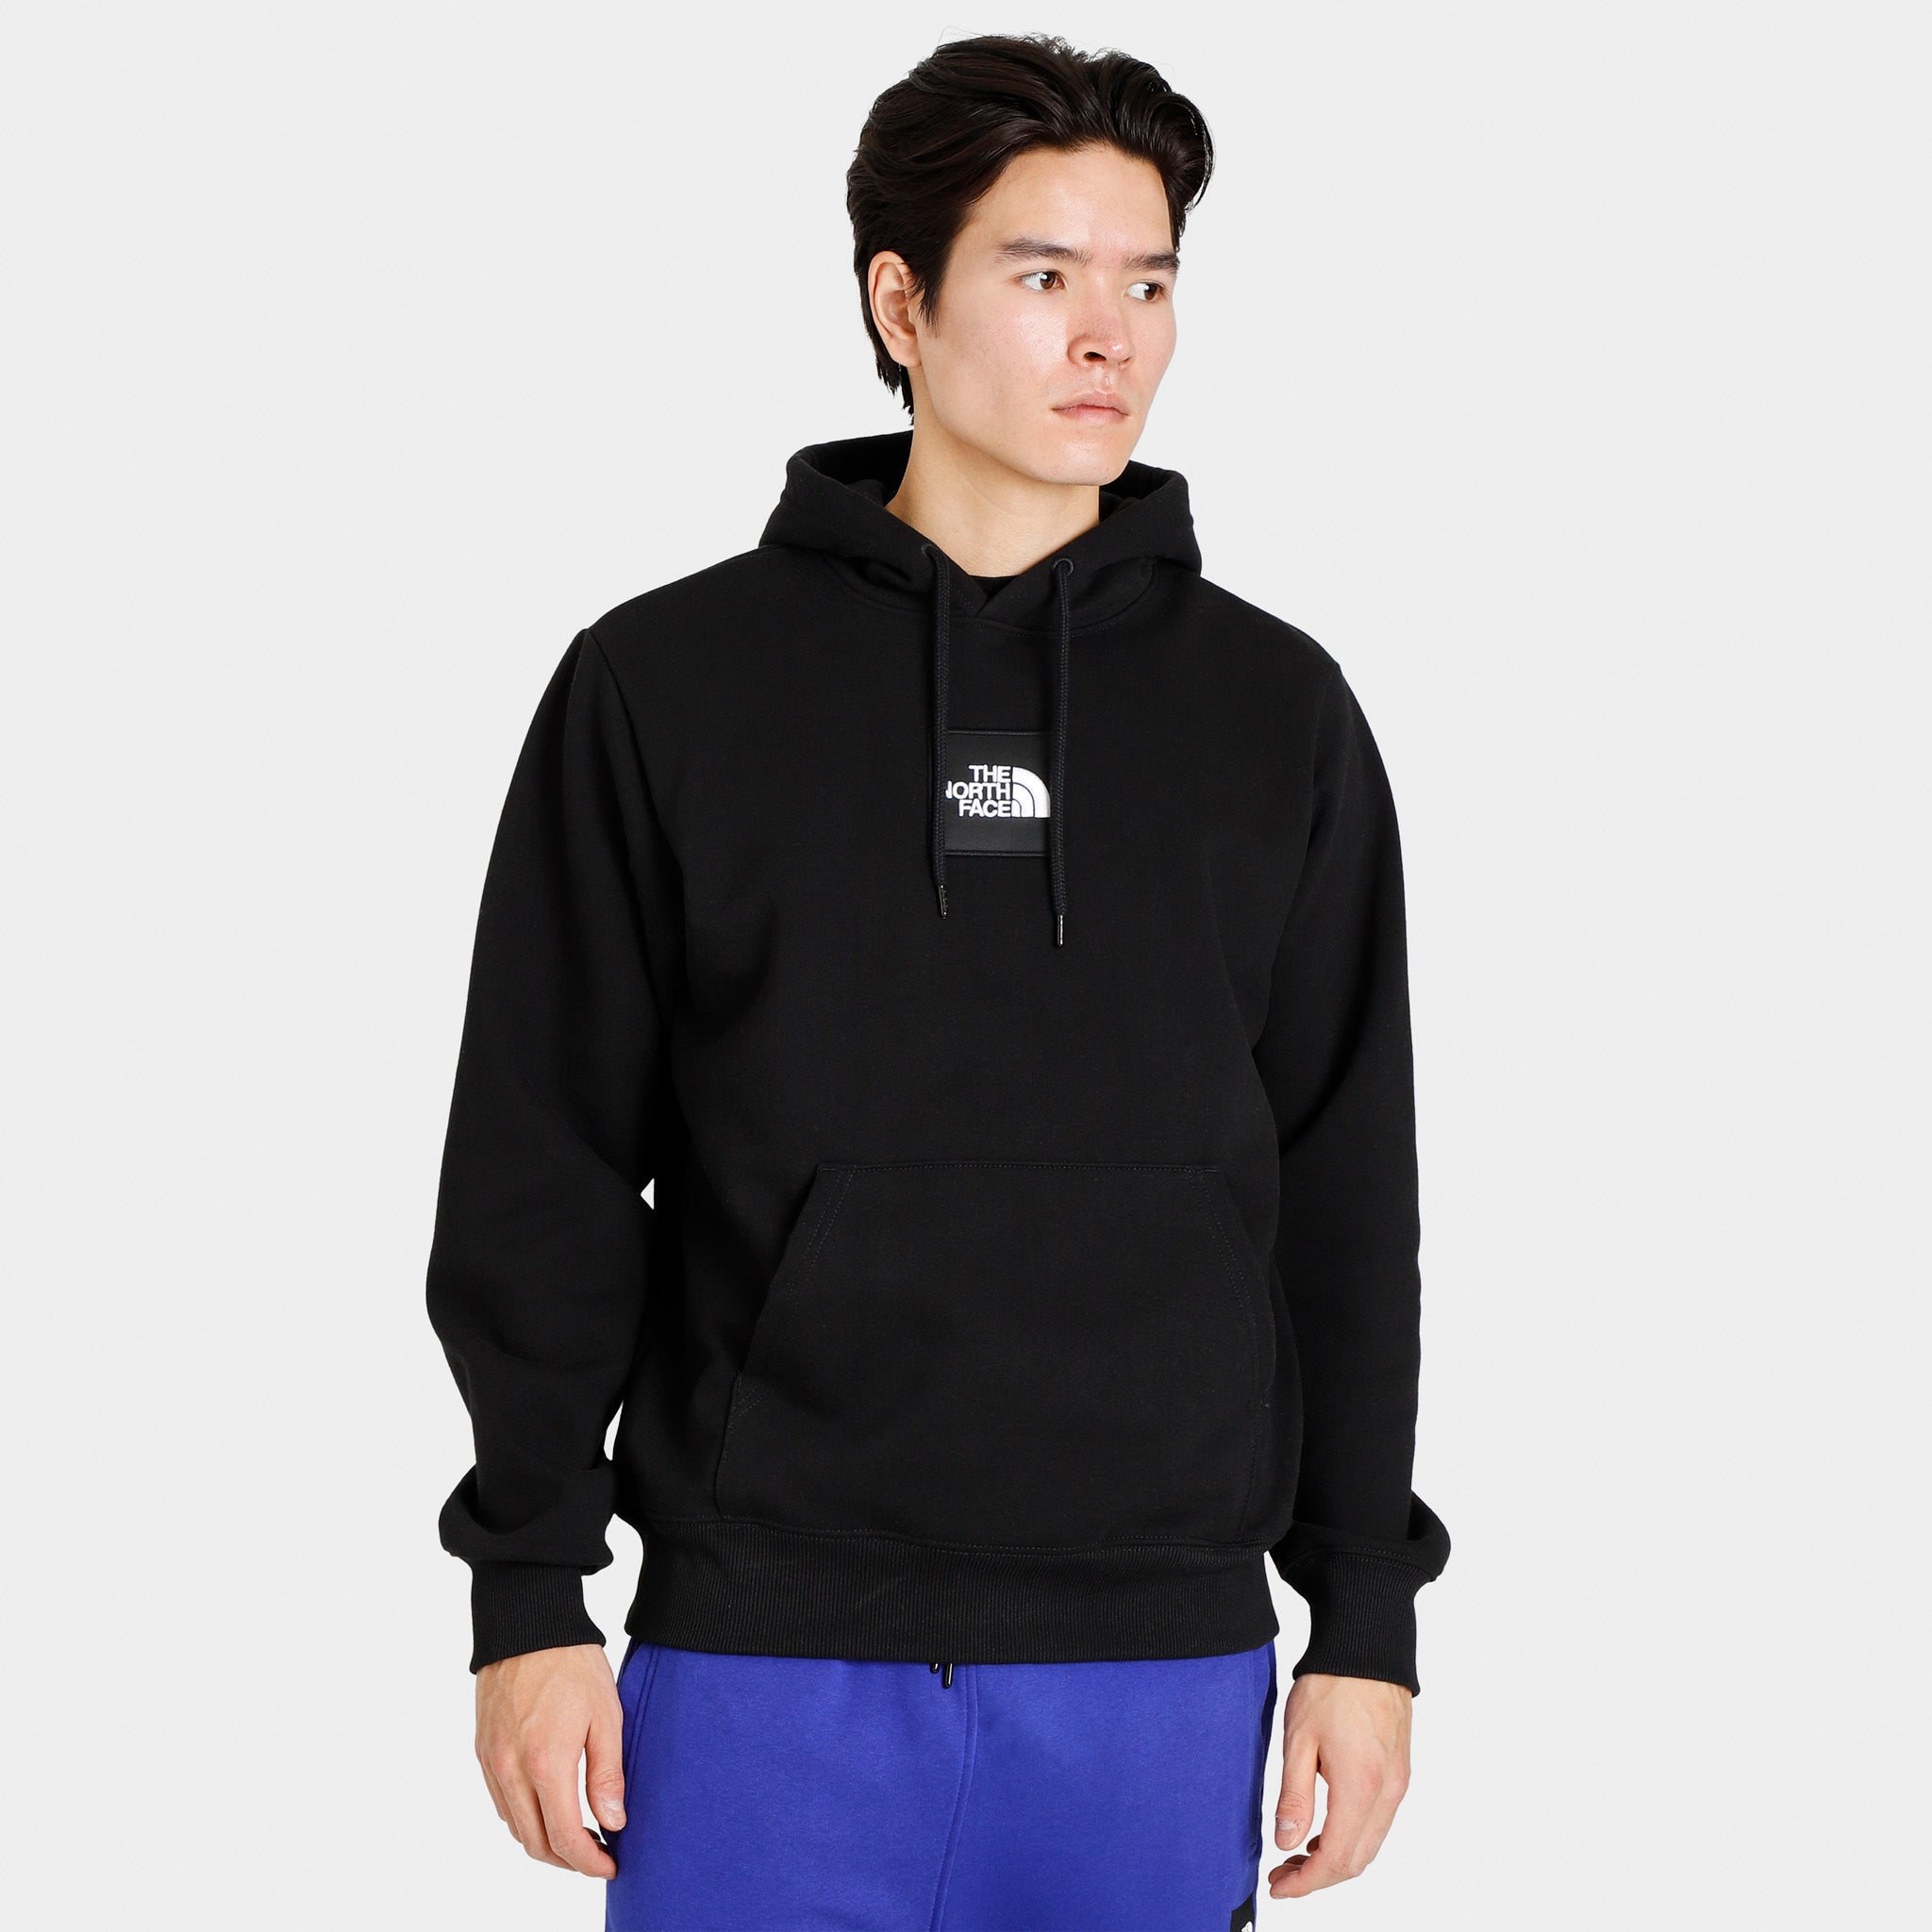 The North Face Mens Heavyweight Box Pullover Hoodie Black